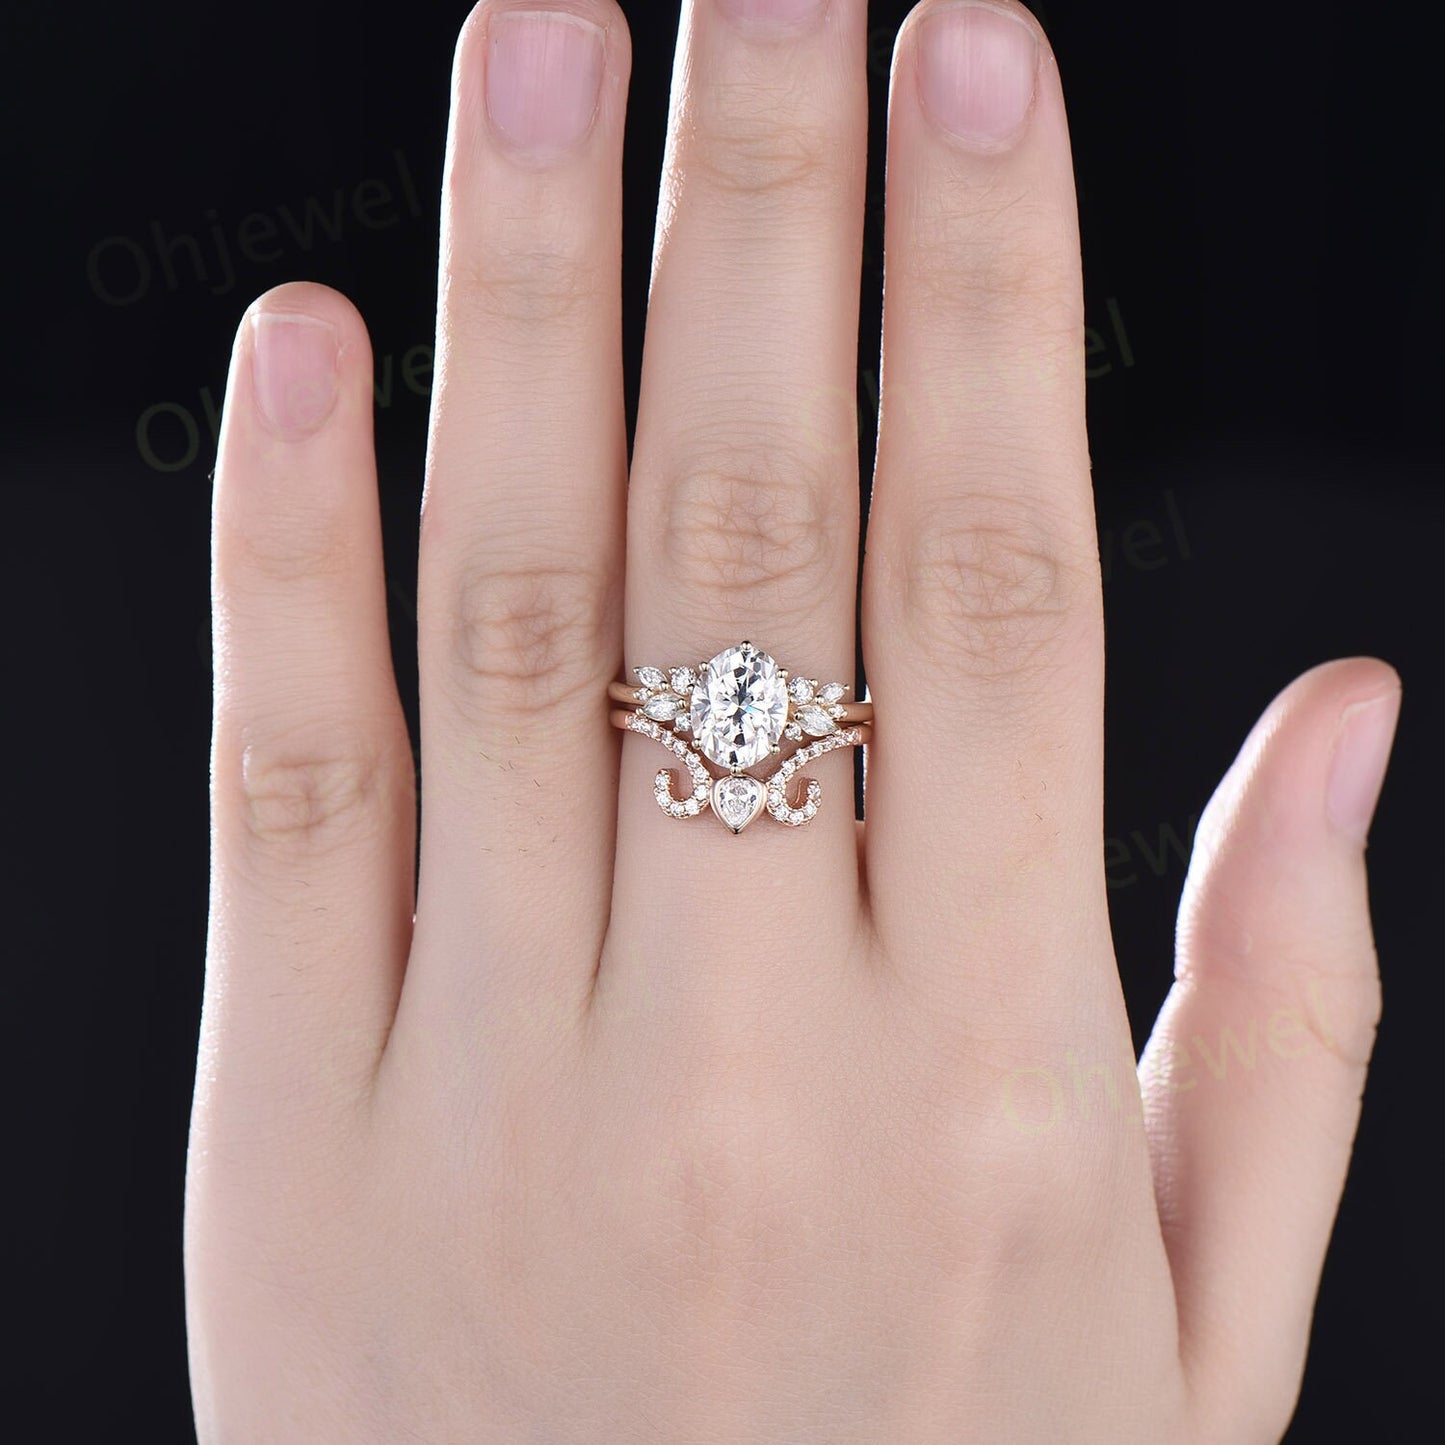 Vintage 2ct oval moissanite engagement ring yellow gold unique marquise cluster engagement ring women diamond ring set promise ring set her